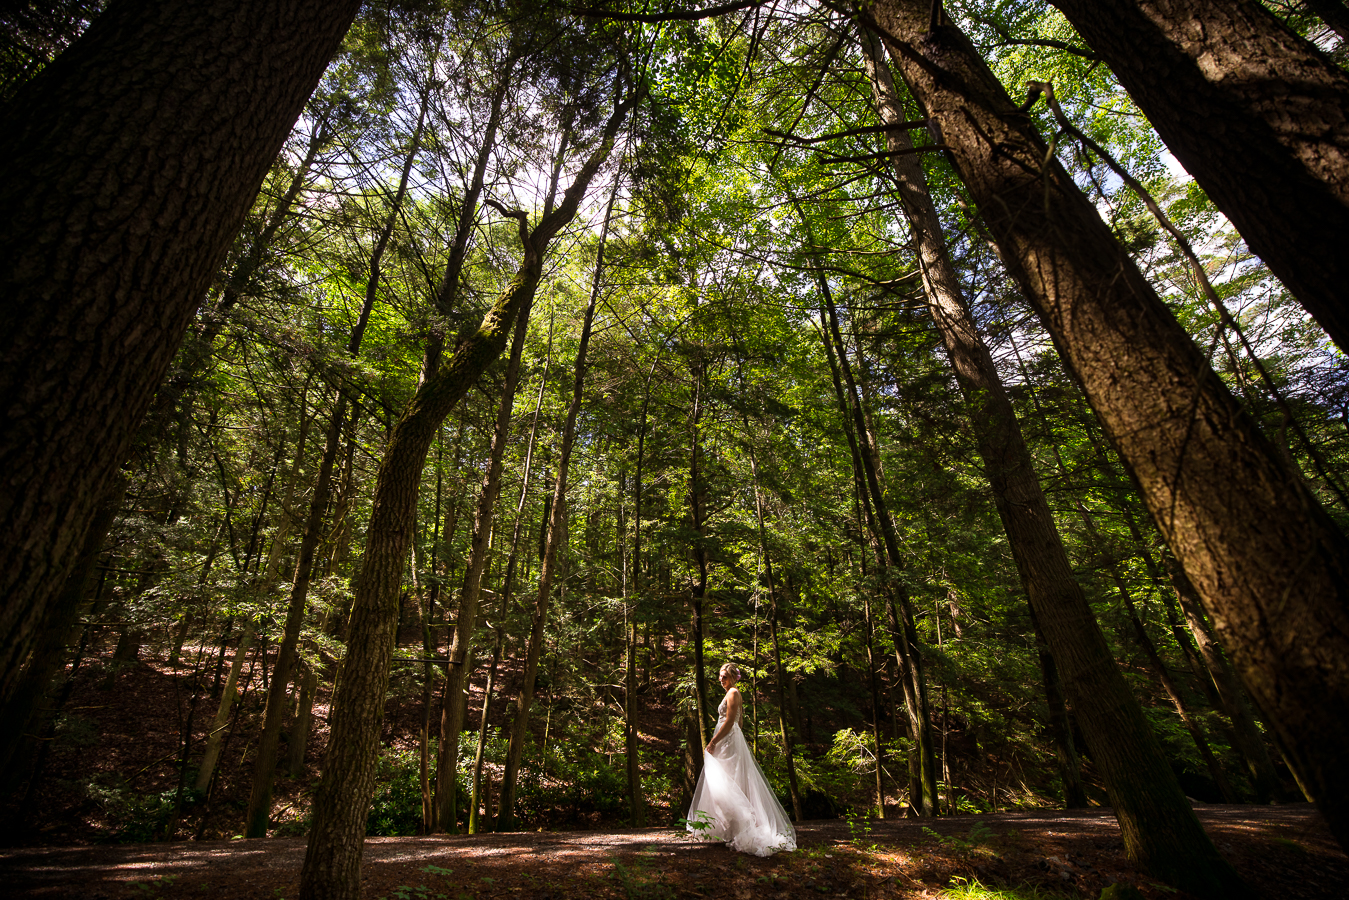 pa wedding photographer, lisa rhinehart, captures this unique, creative image of the bride showing off her dress as she is standing amongst the trees before her wedding ceremony